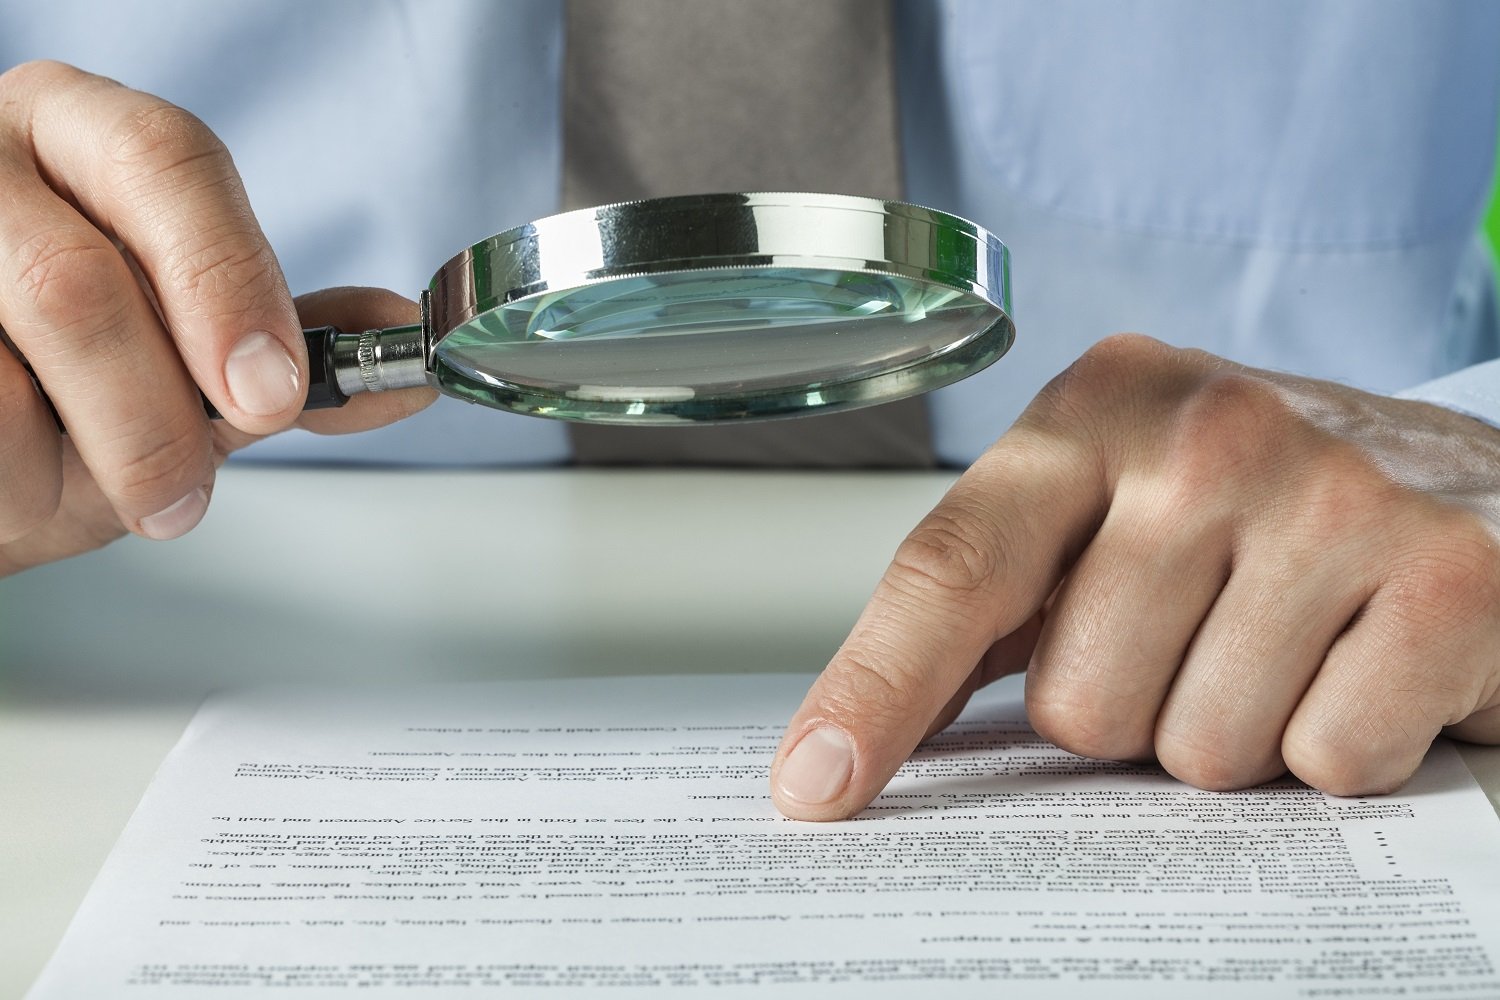 a pair of hands using magnifying glass over word document